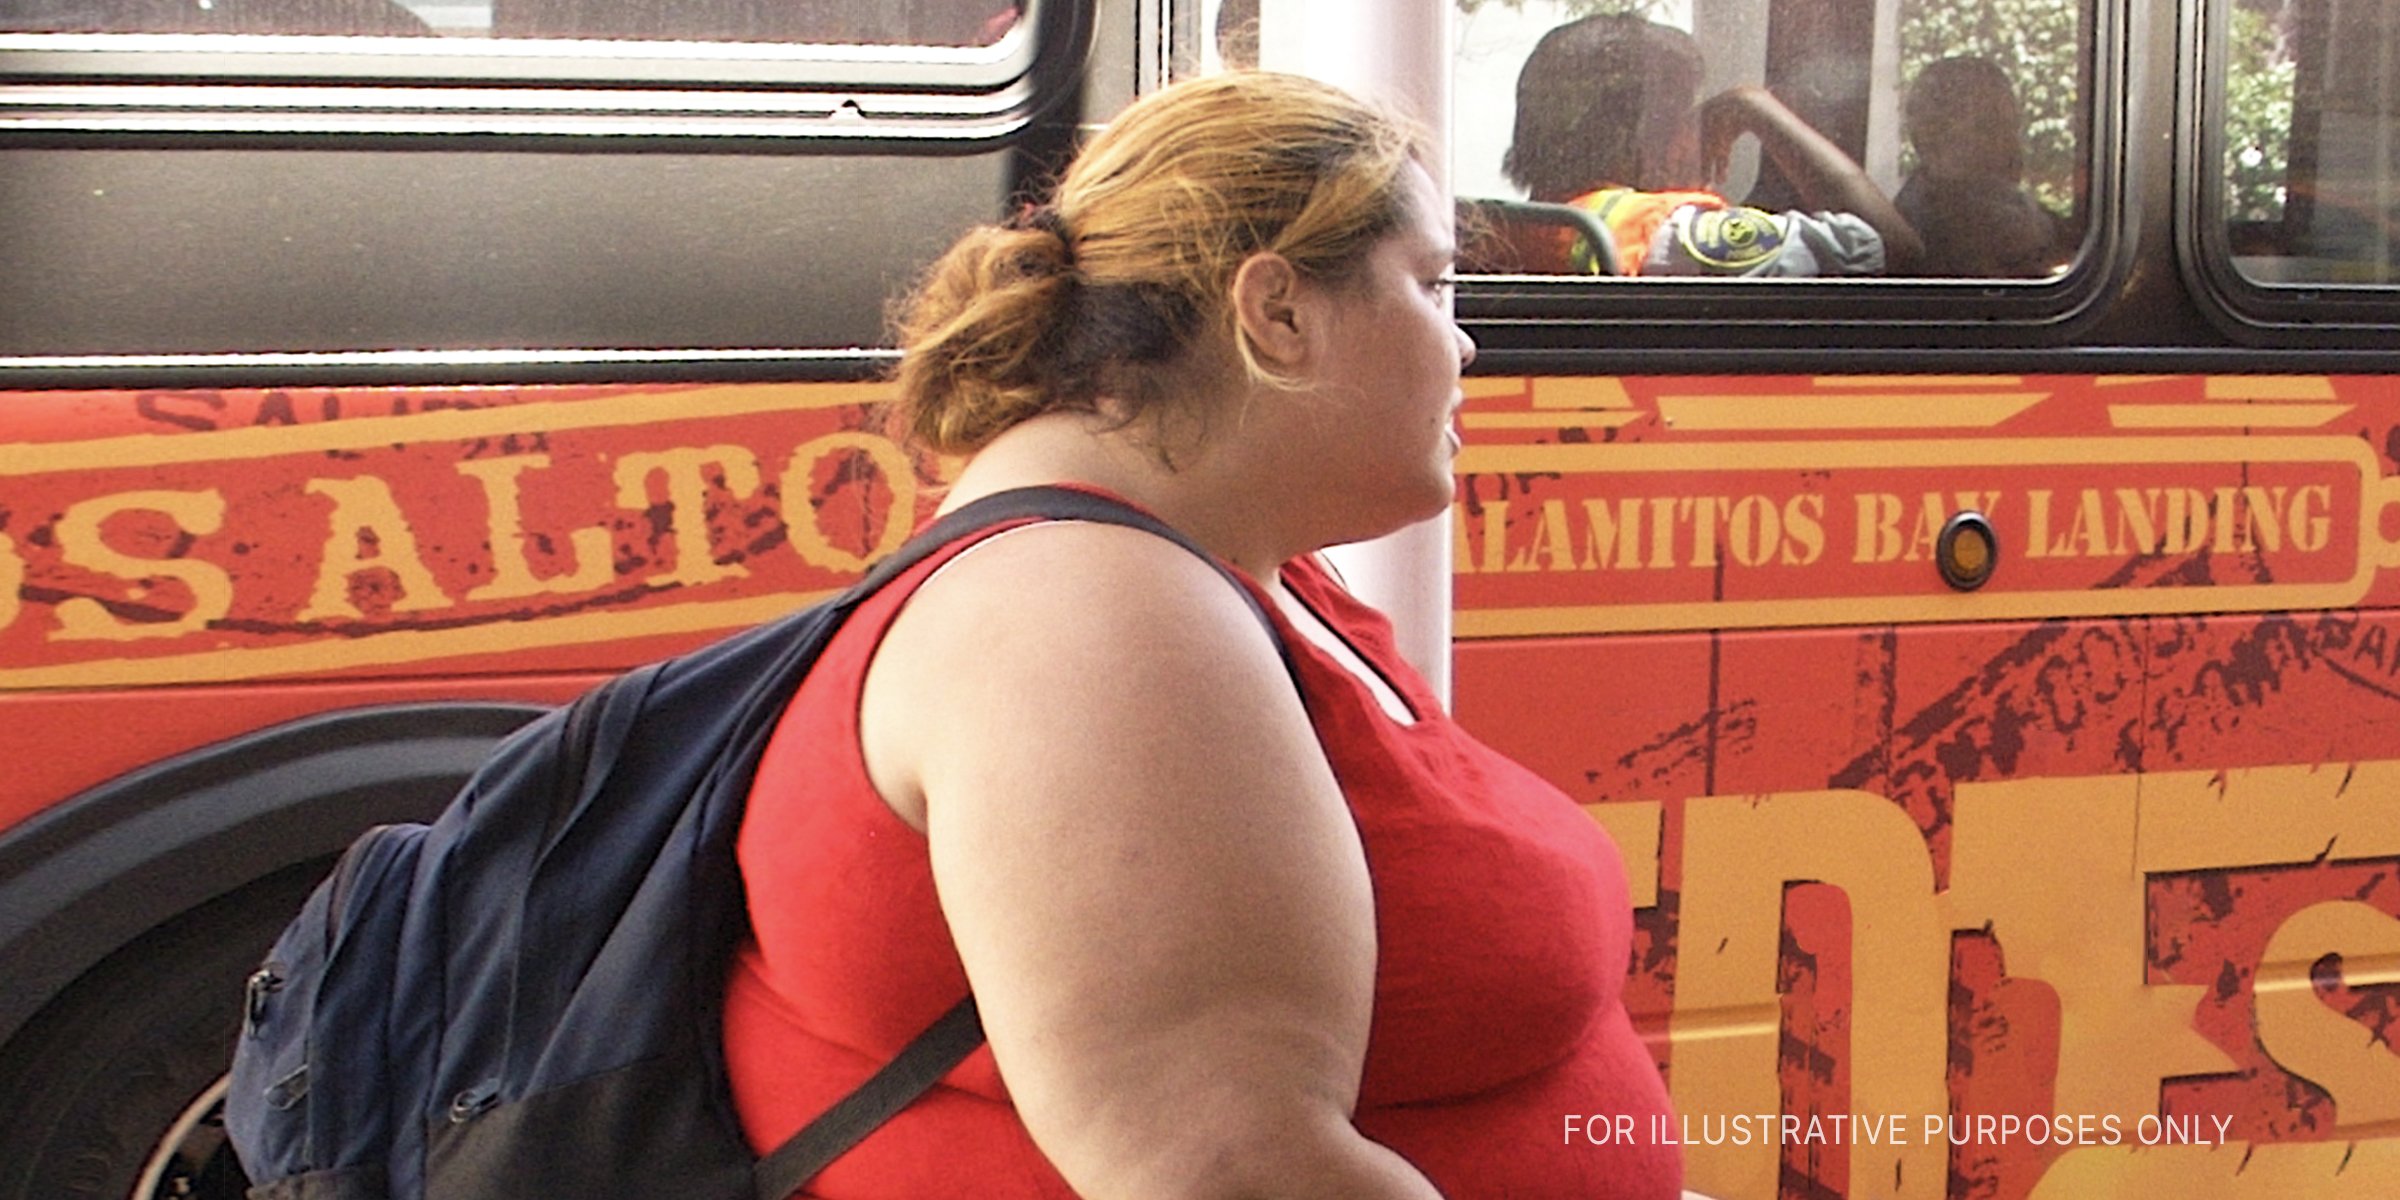 Overweight woman walking near bus | Source:  Flickr / colros (CC BY 2.0) 